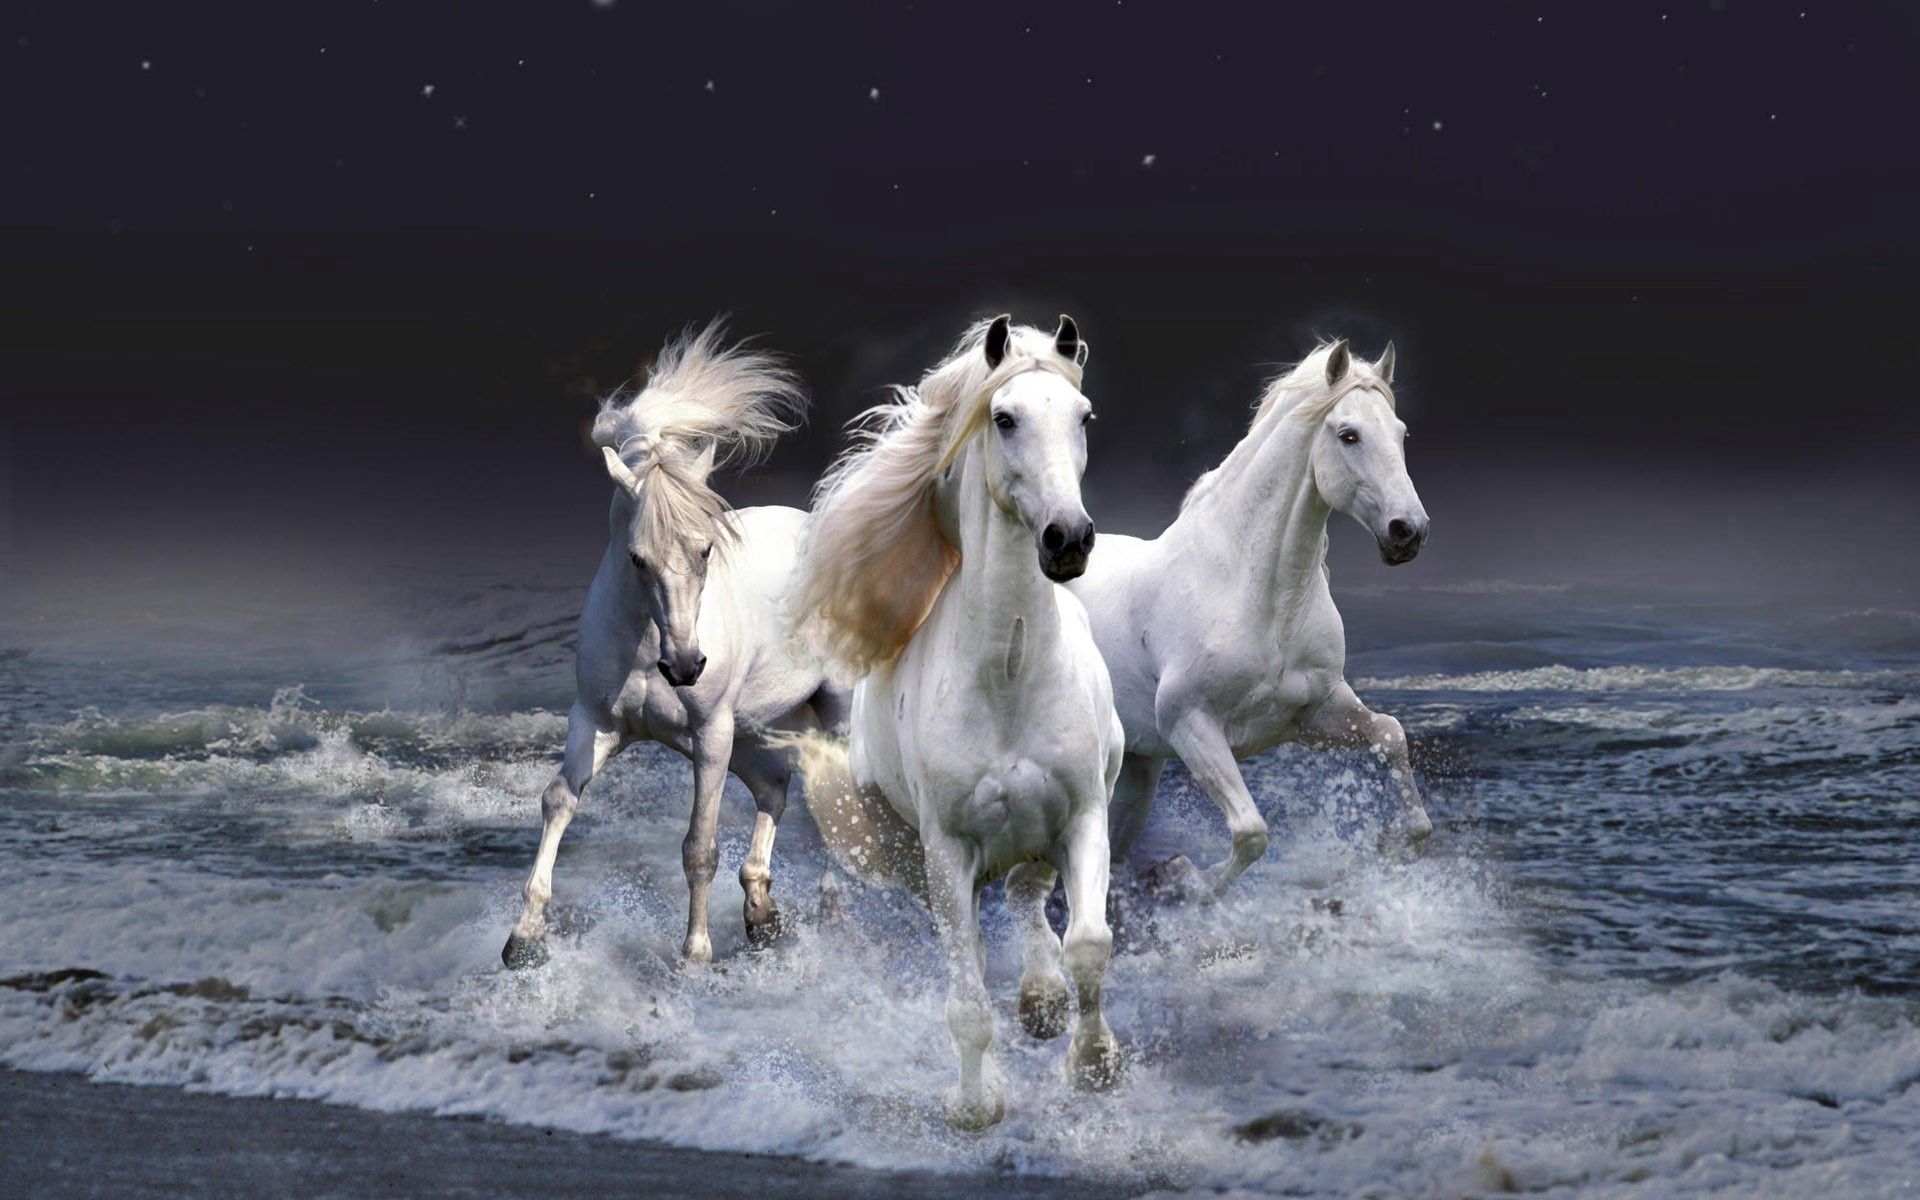 Download Horses wallpaper for mobile phone, free Horses HD picture